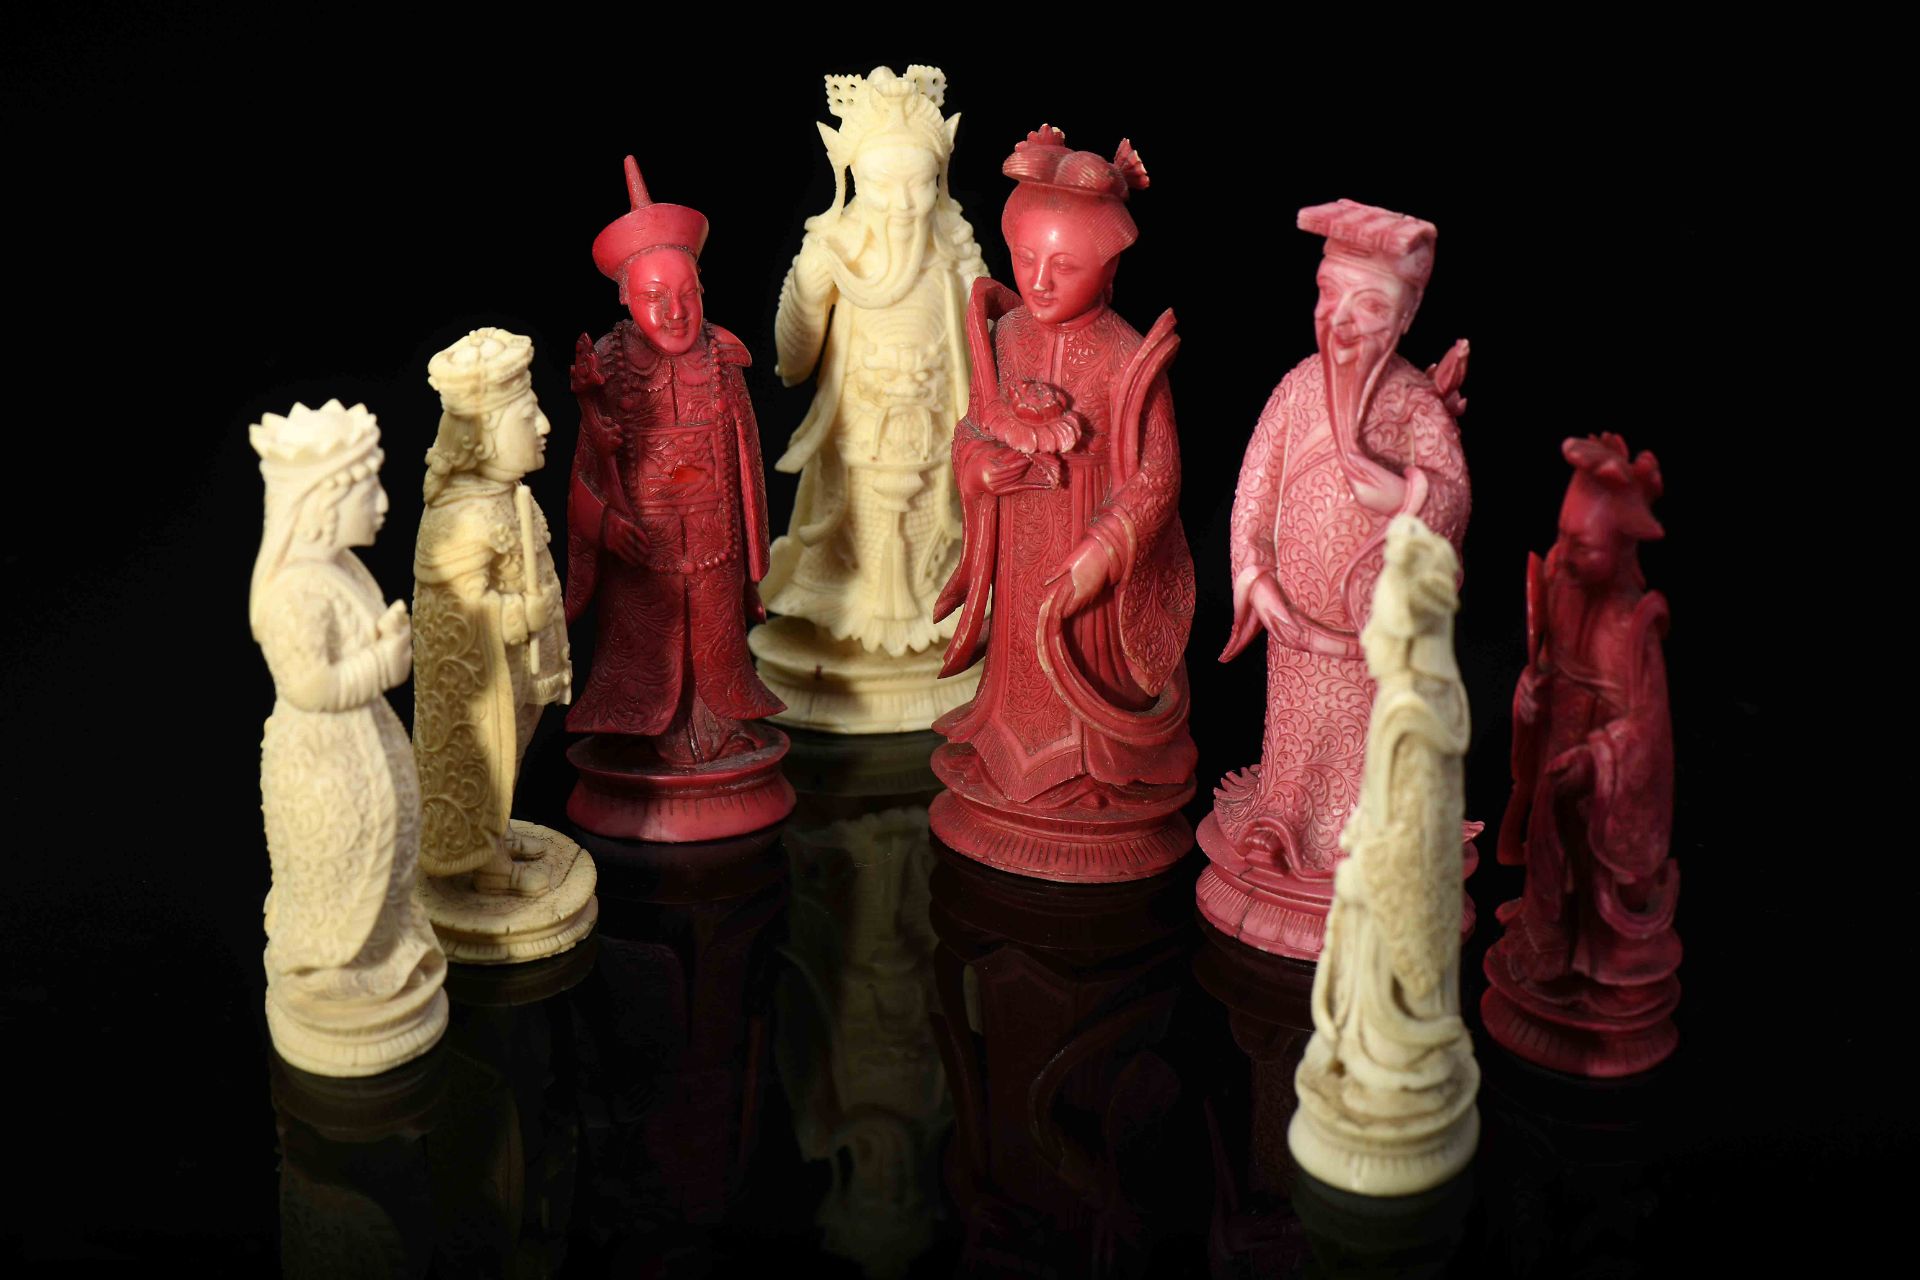 Eight chess pieces - figures